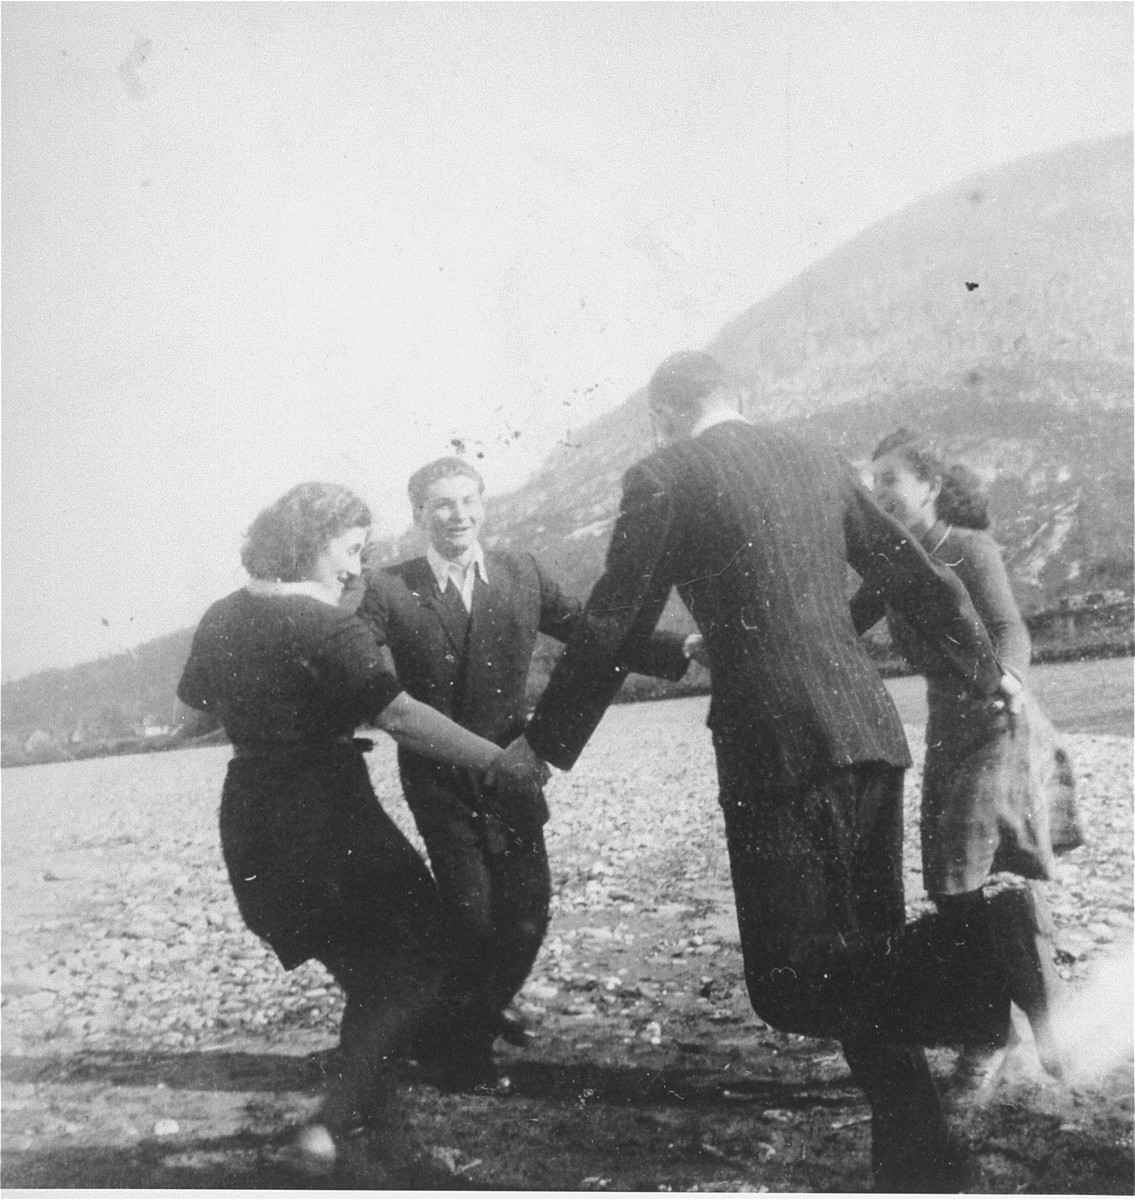 Members of the Hanoar Hatzioni Zionist youth movement in Tacovo, dance on the shore of the river Tissa.

Among those pictured are Frimet Ickovic.